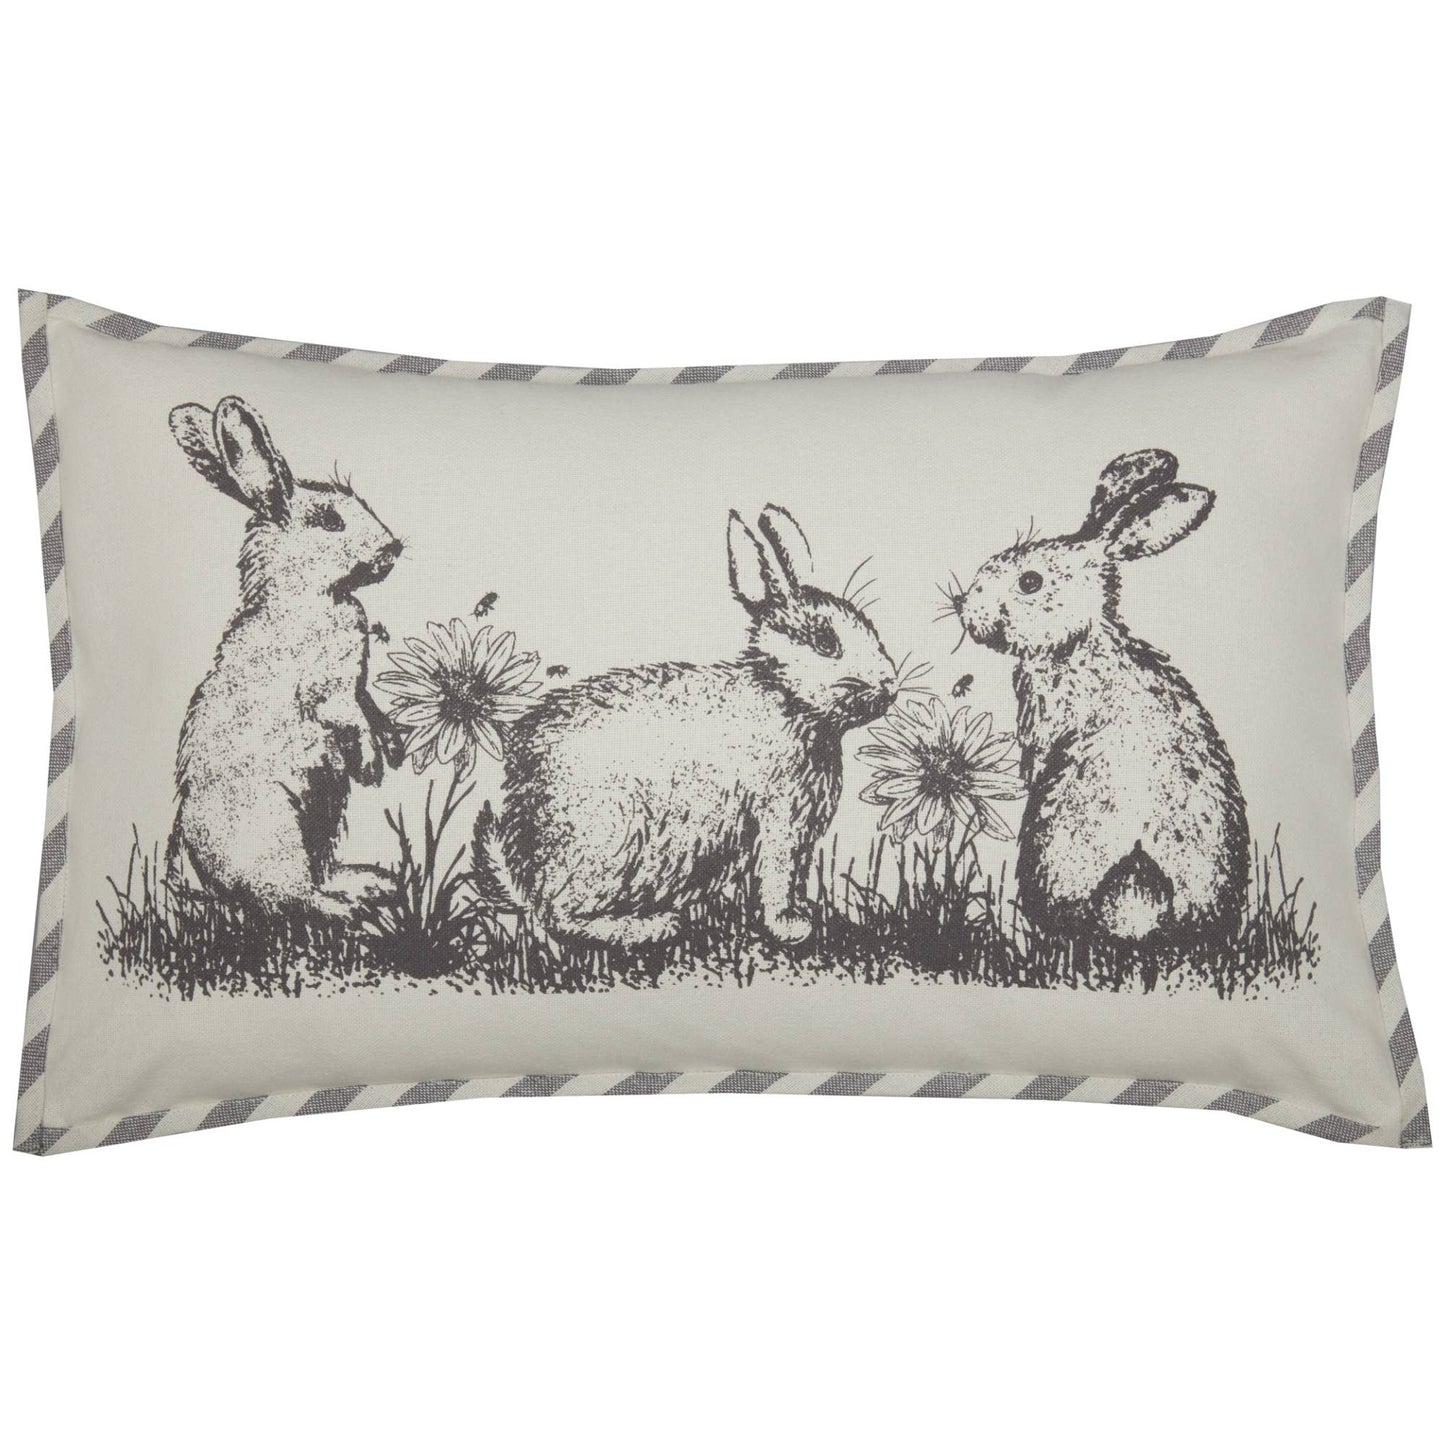 In the Meadow Pillow Cover 25Lx15W